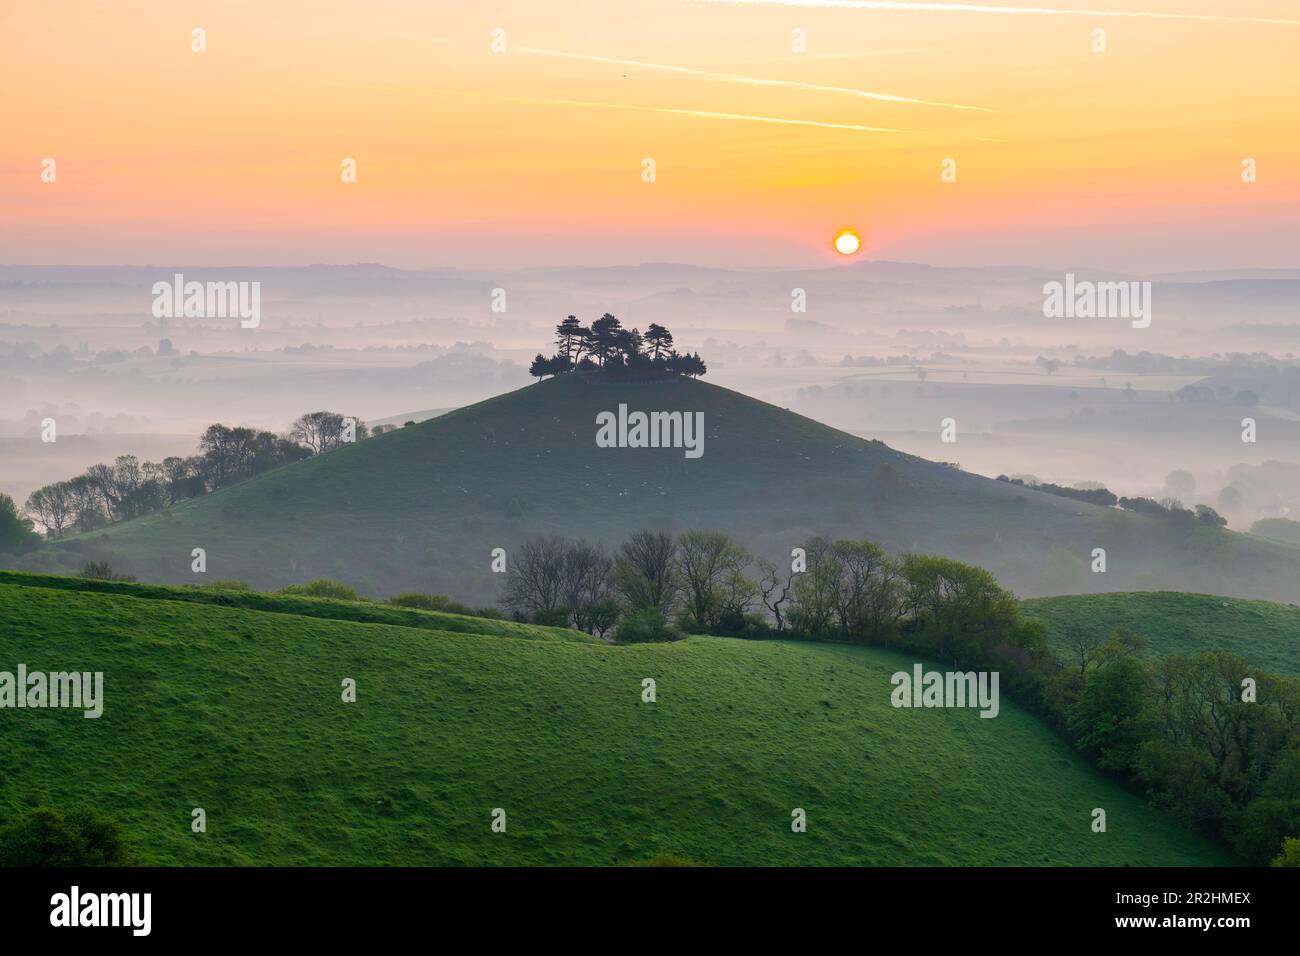 A misty sunrise at Colmers Hill at Symondsbury near Bridport in Dorset on a warm clear spring morning. Stock Photo